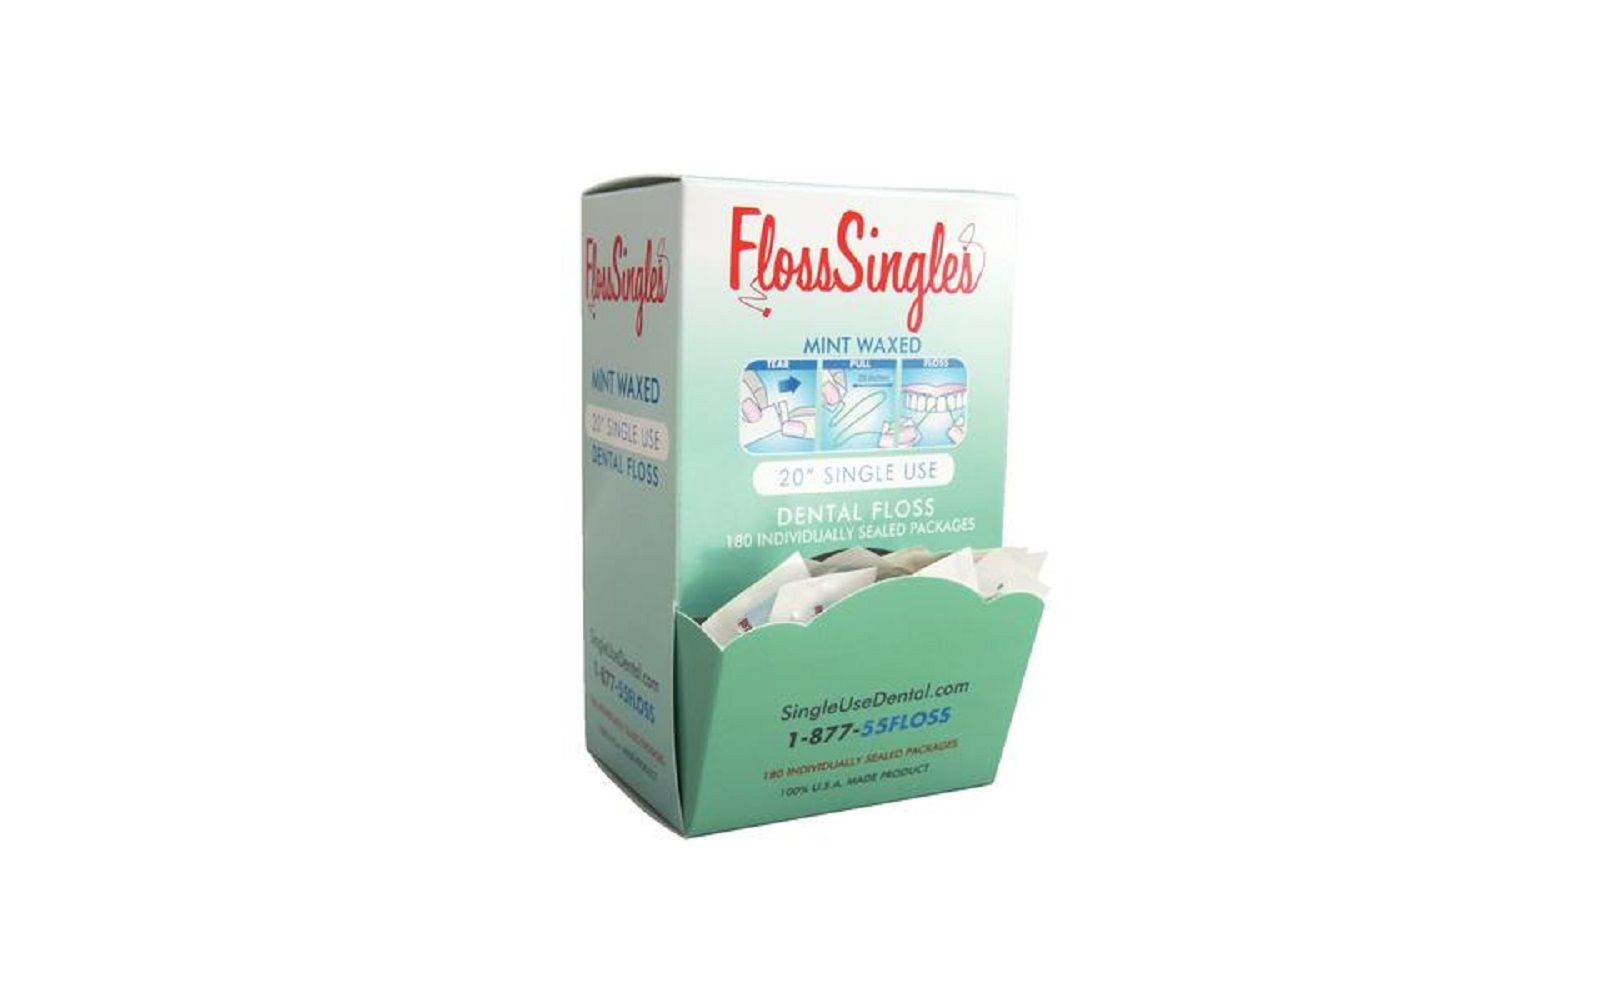 Floss singles – mint waxed, individually packaged singles, 180/pkg